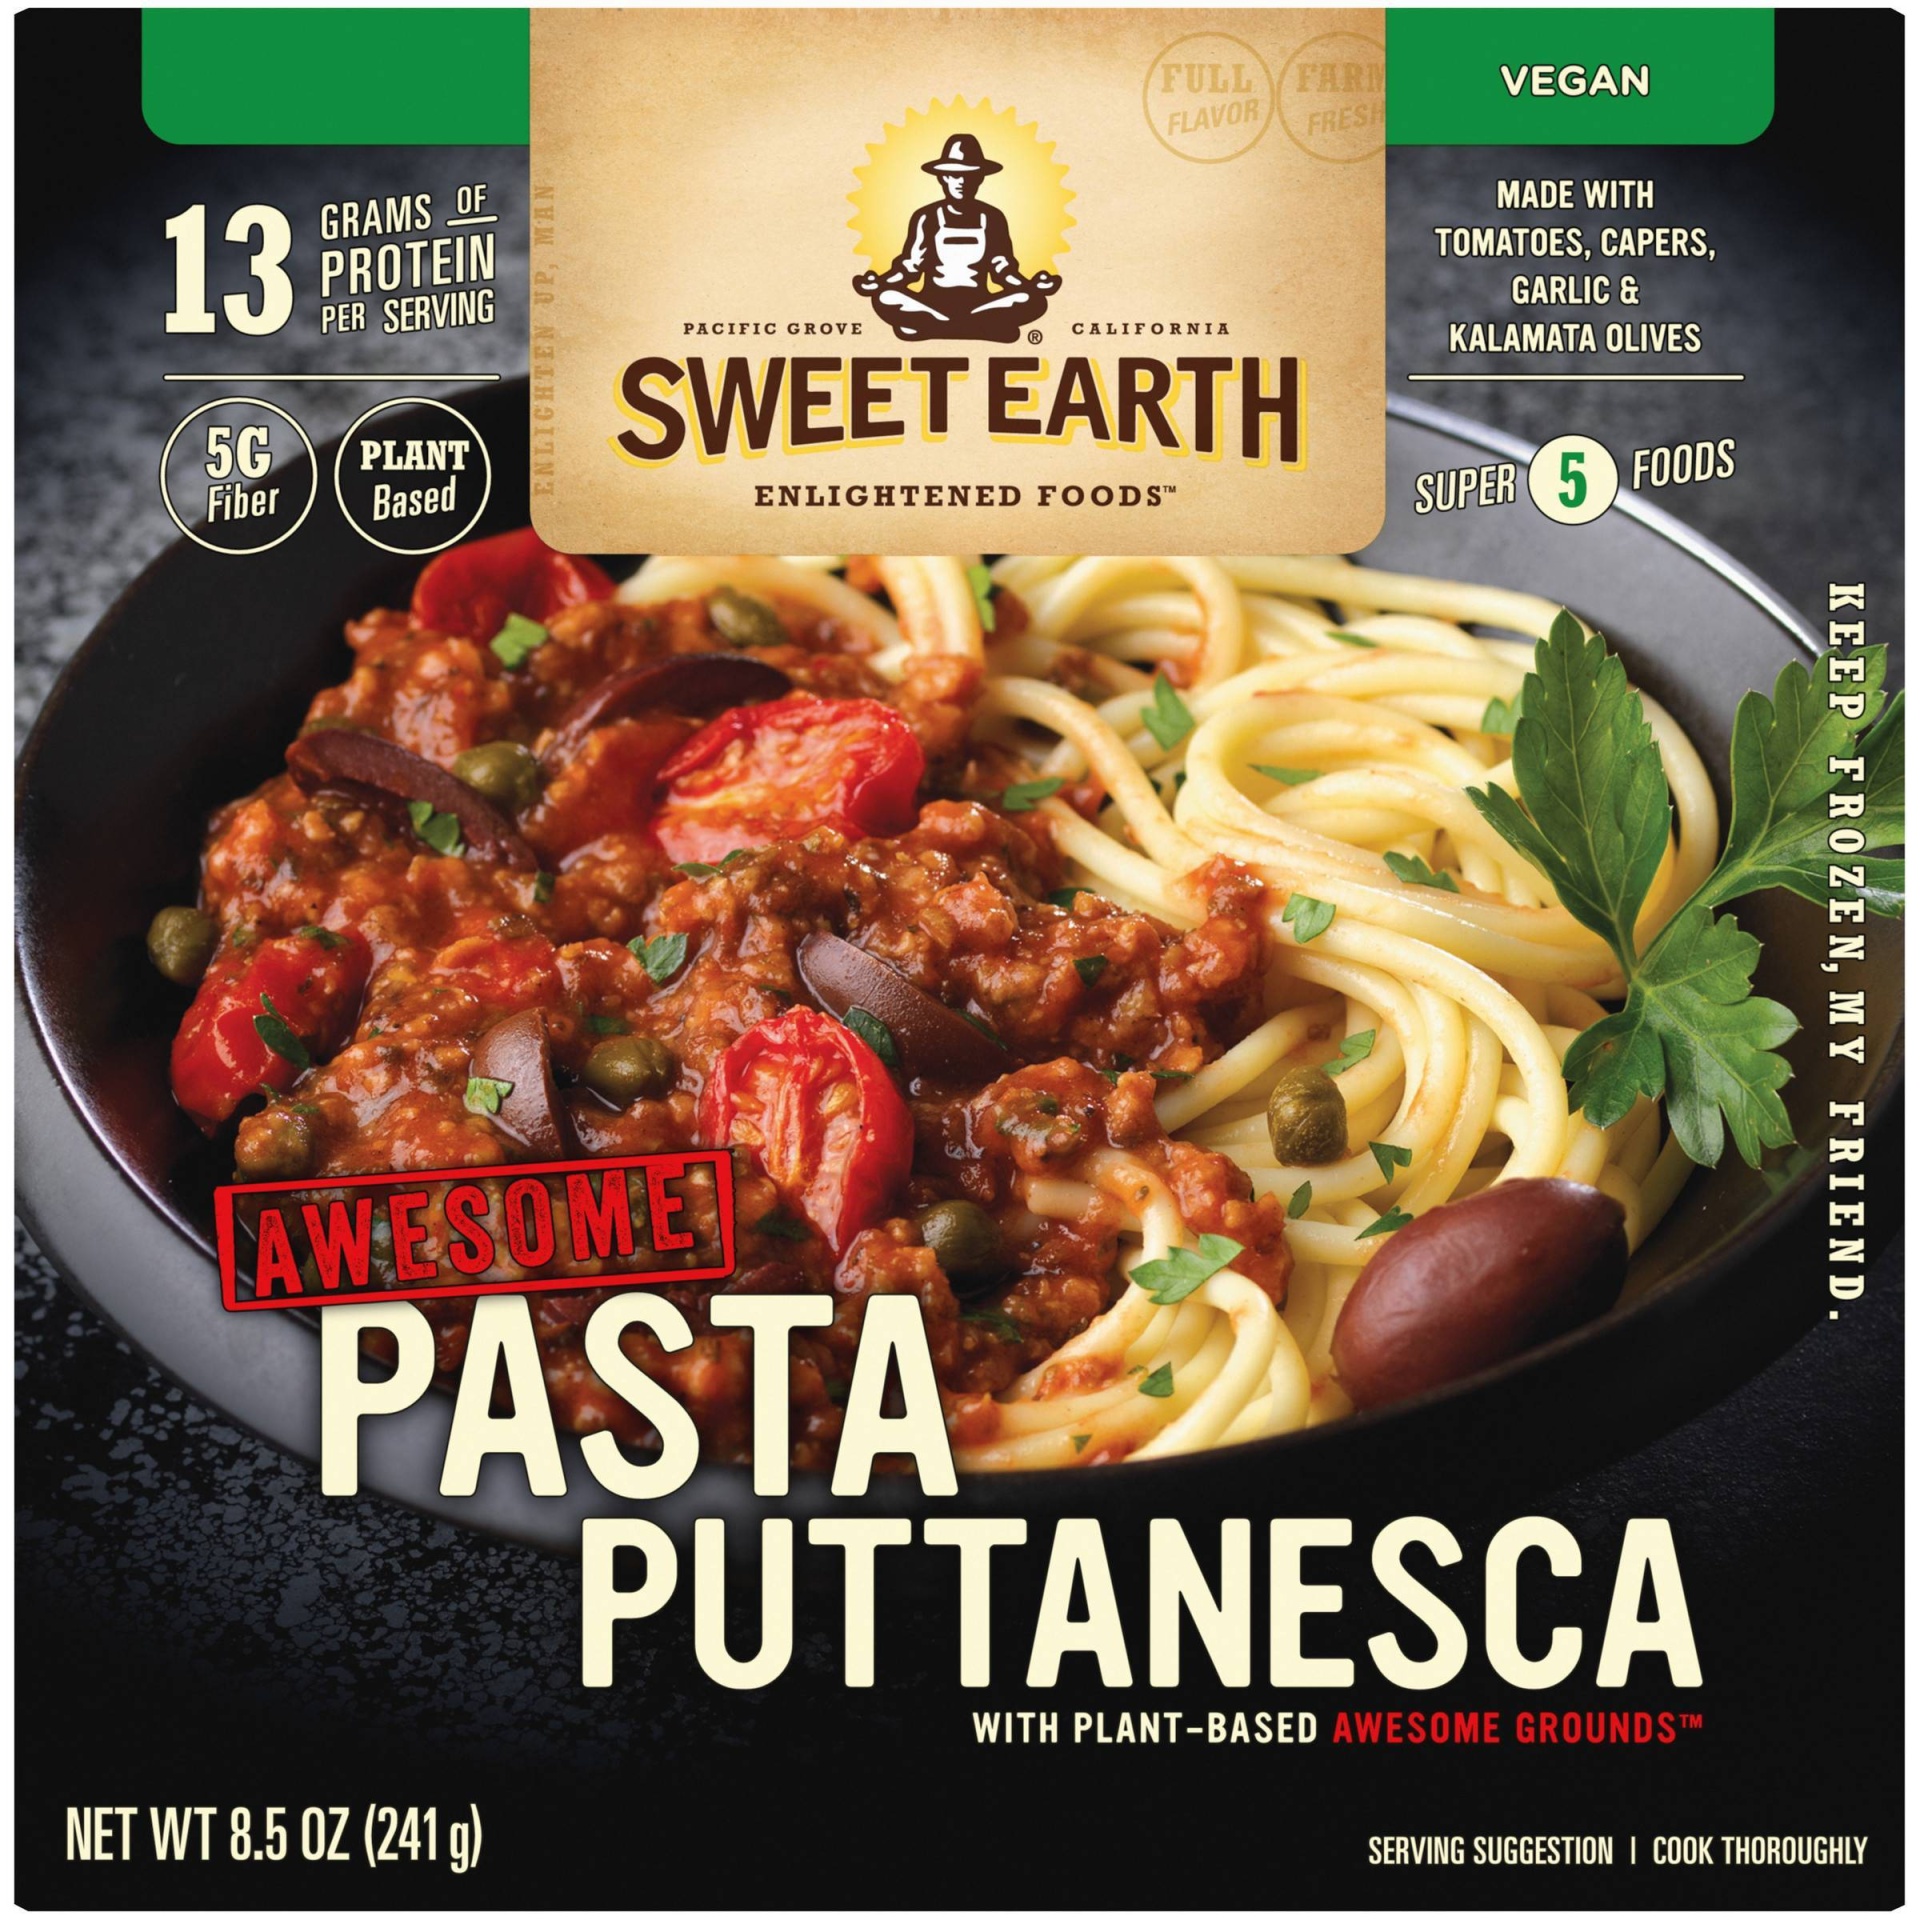 slide 1 of 9, SWEET EARTH NATURAL FOODS Sweet Earth Vegan Frozen Awesome Pasta Puttanesca, 8.5 oz